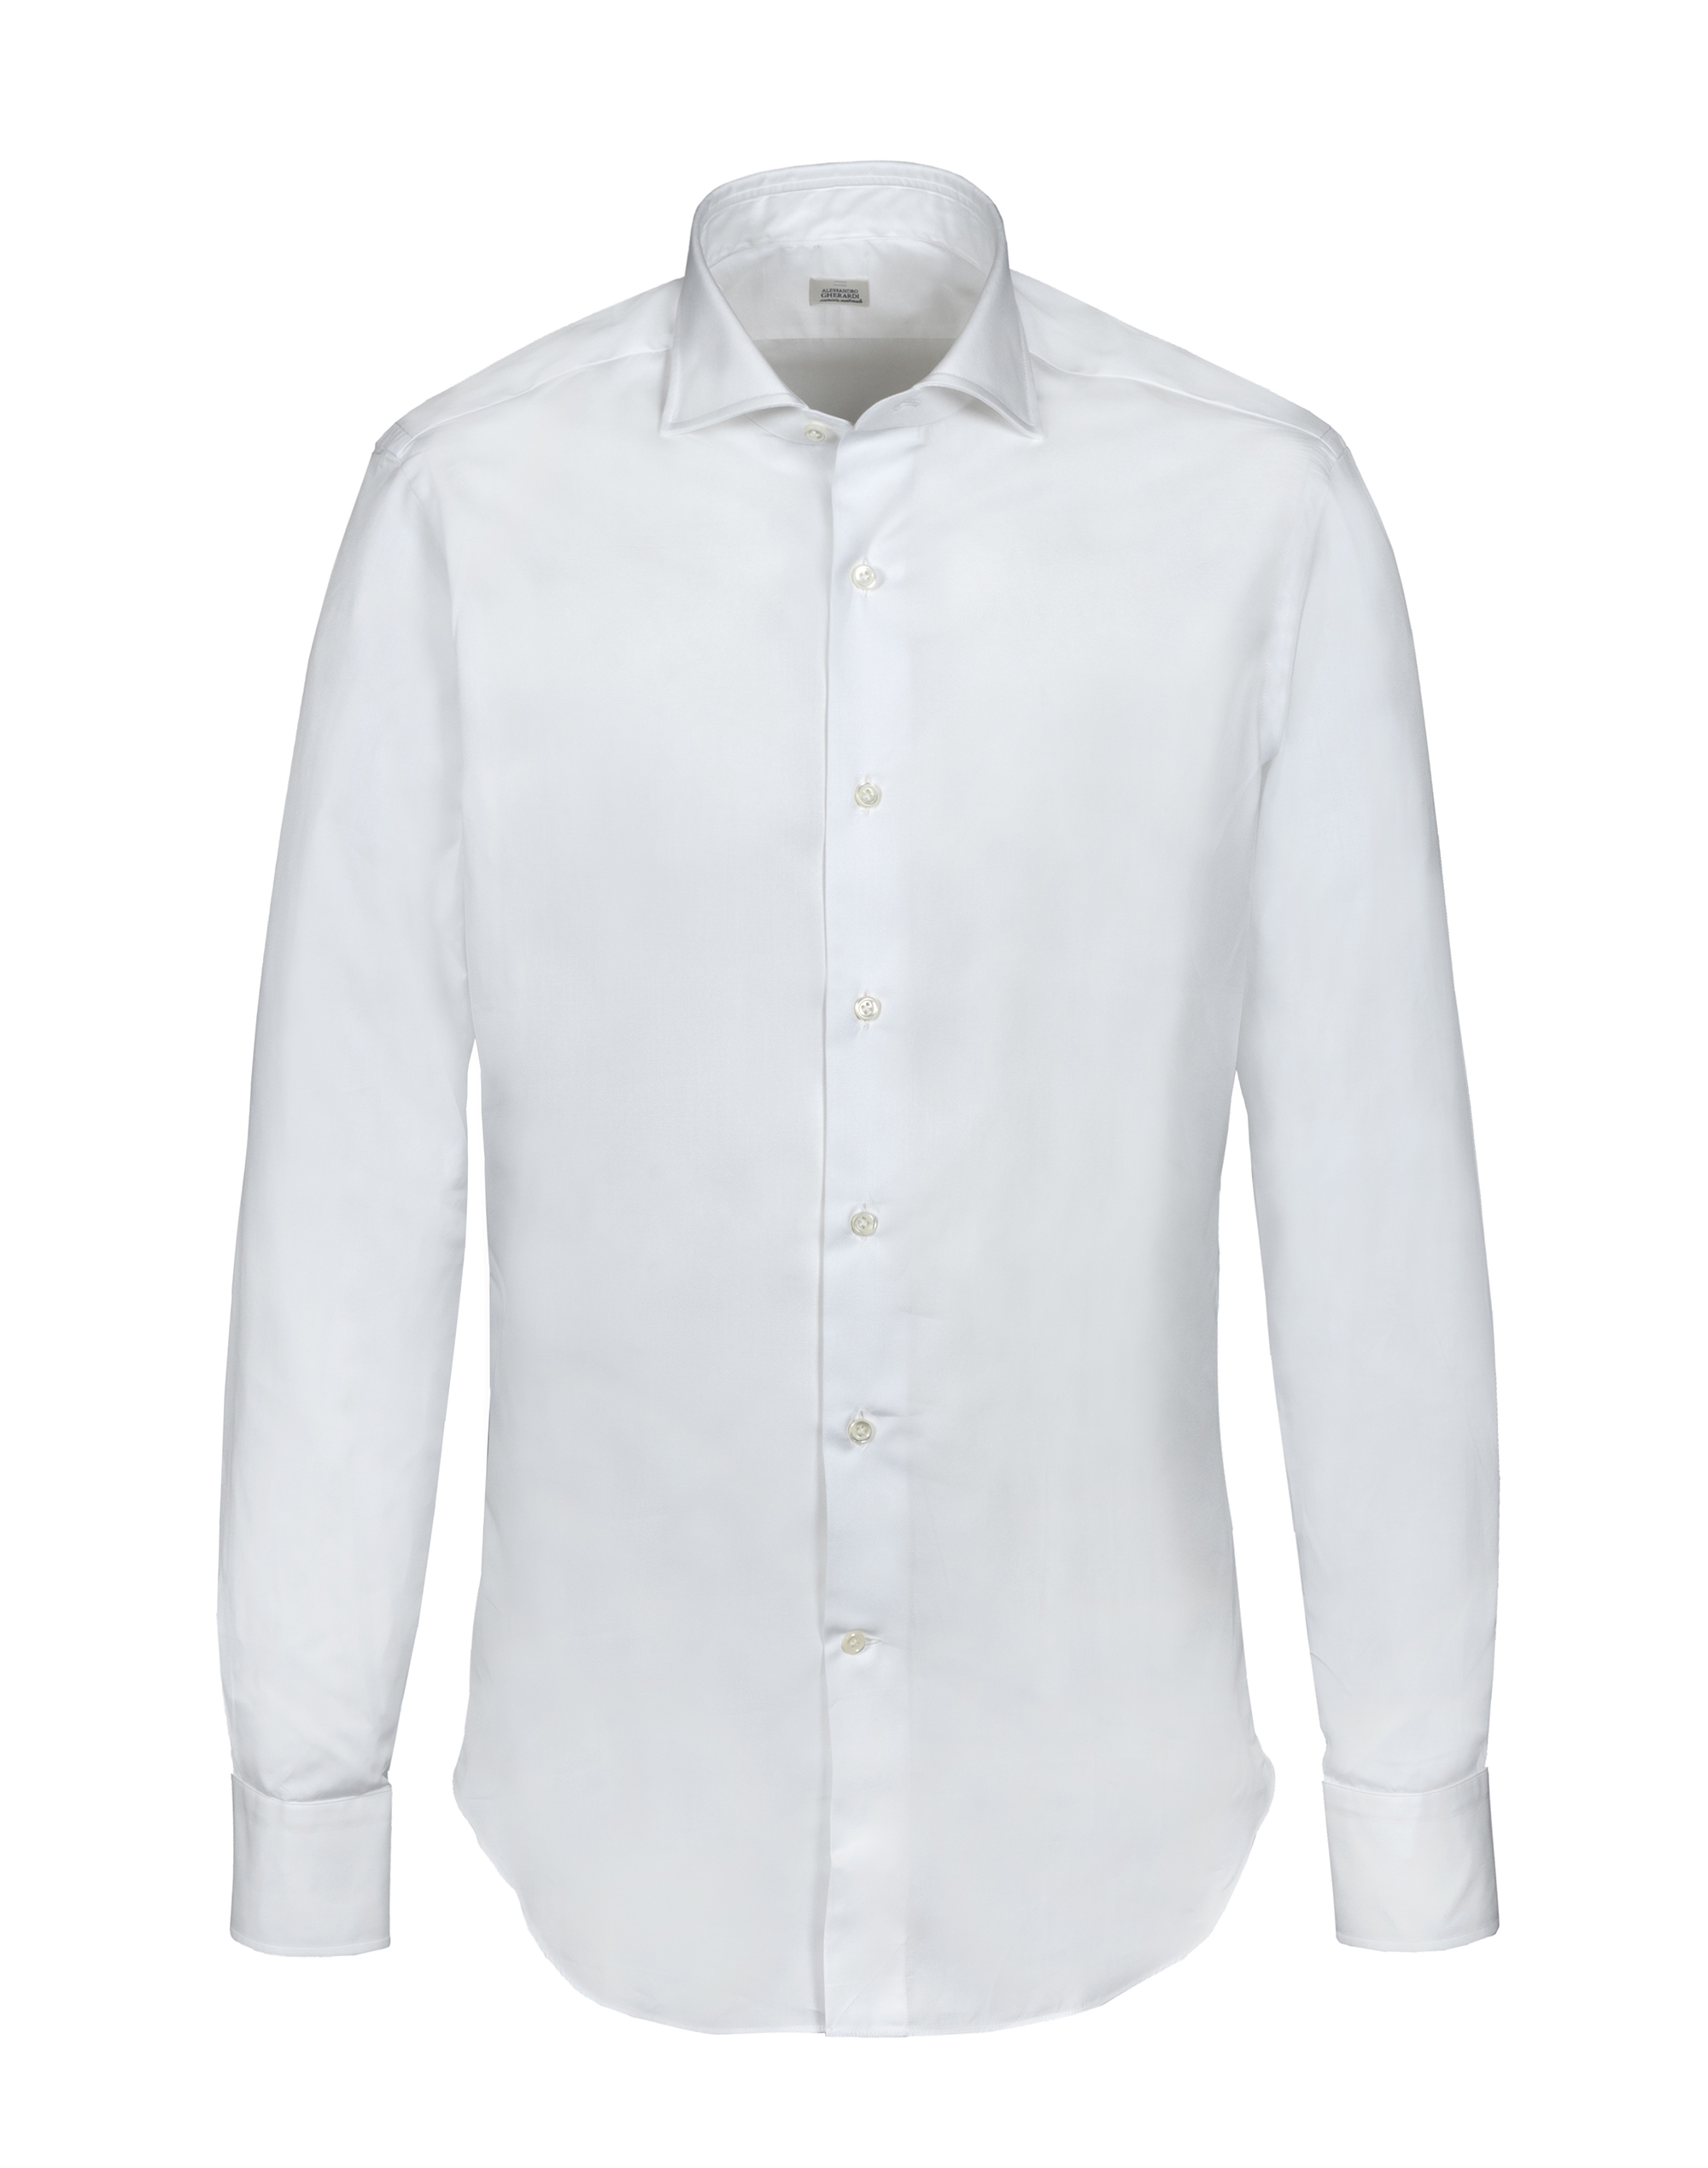 Alessandro Gherardi - Long Sleeve Shirt - White - Shirt - Handmade in Italy  - Luxury Exclusive Collection - Avvenice